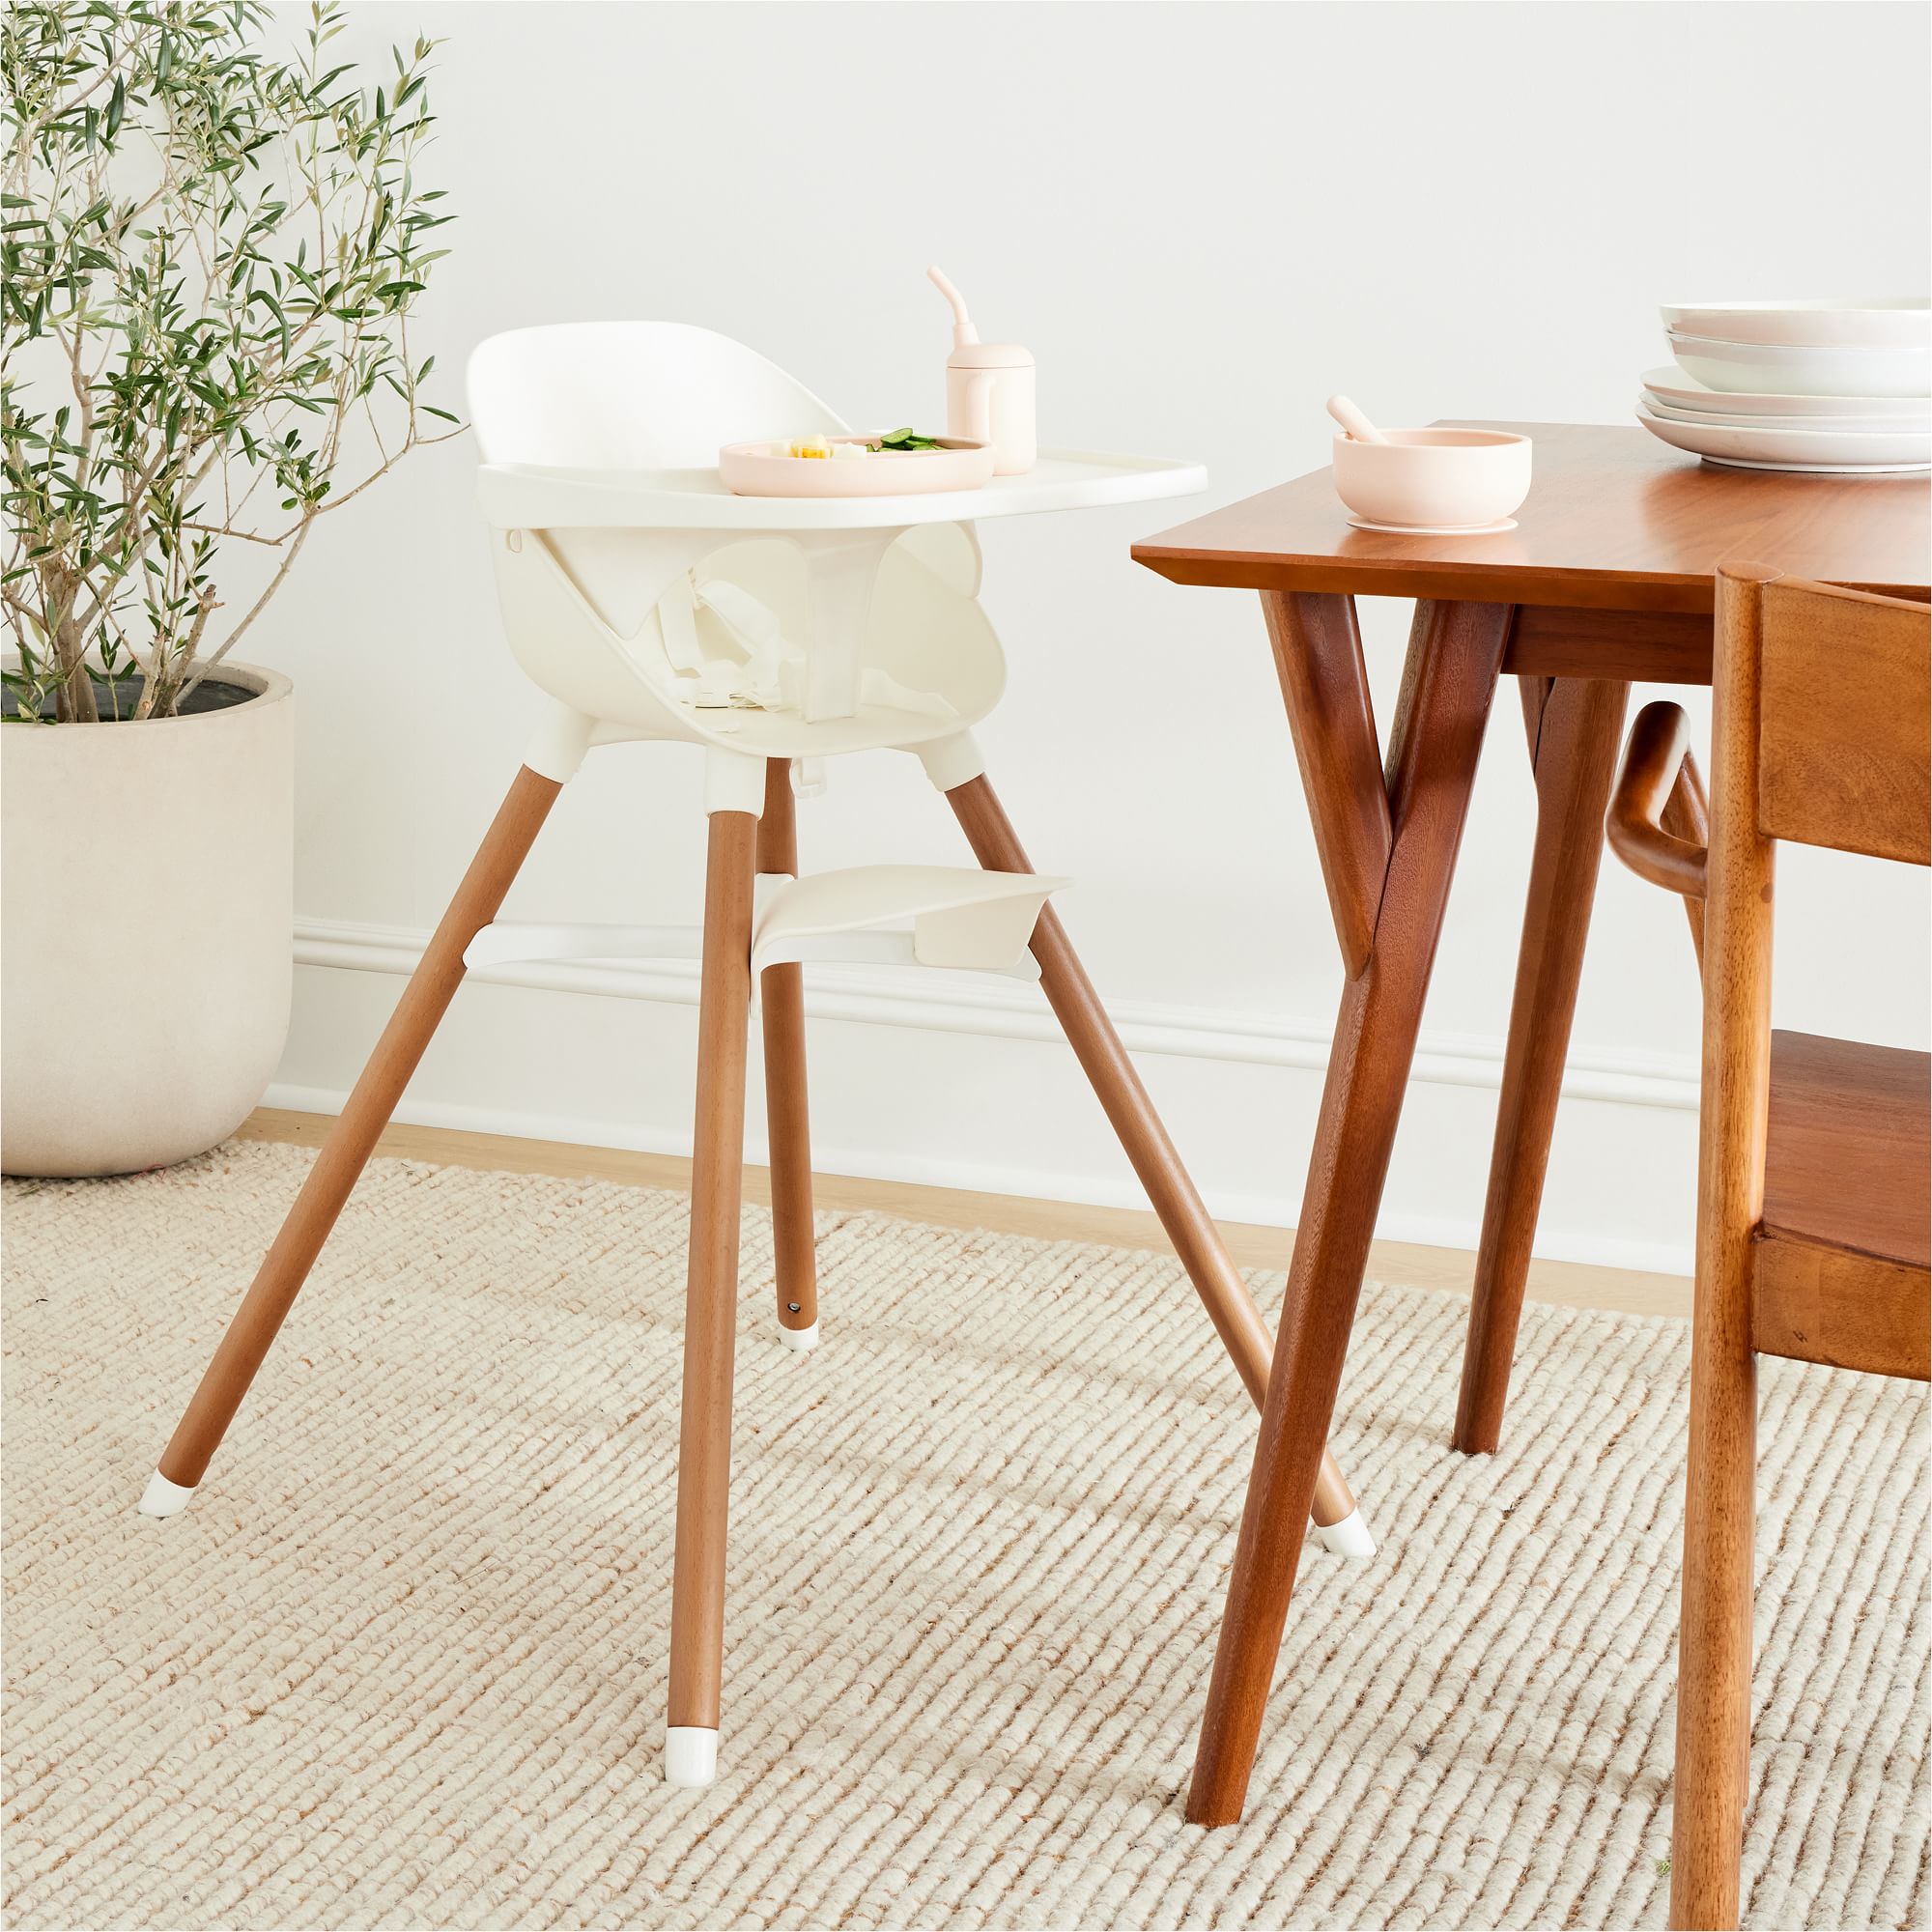 The Chair by Lalo x West Elm Kids |